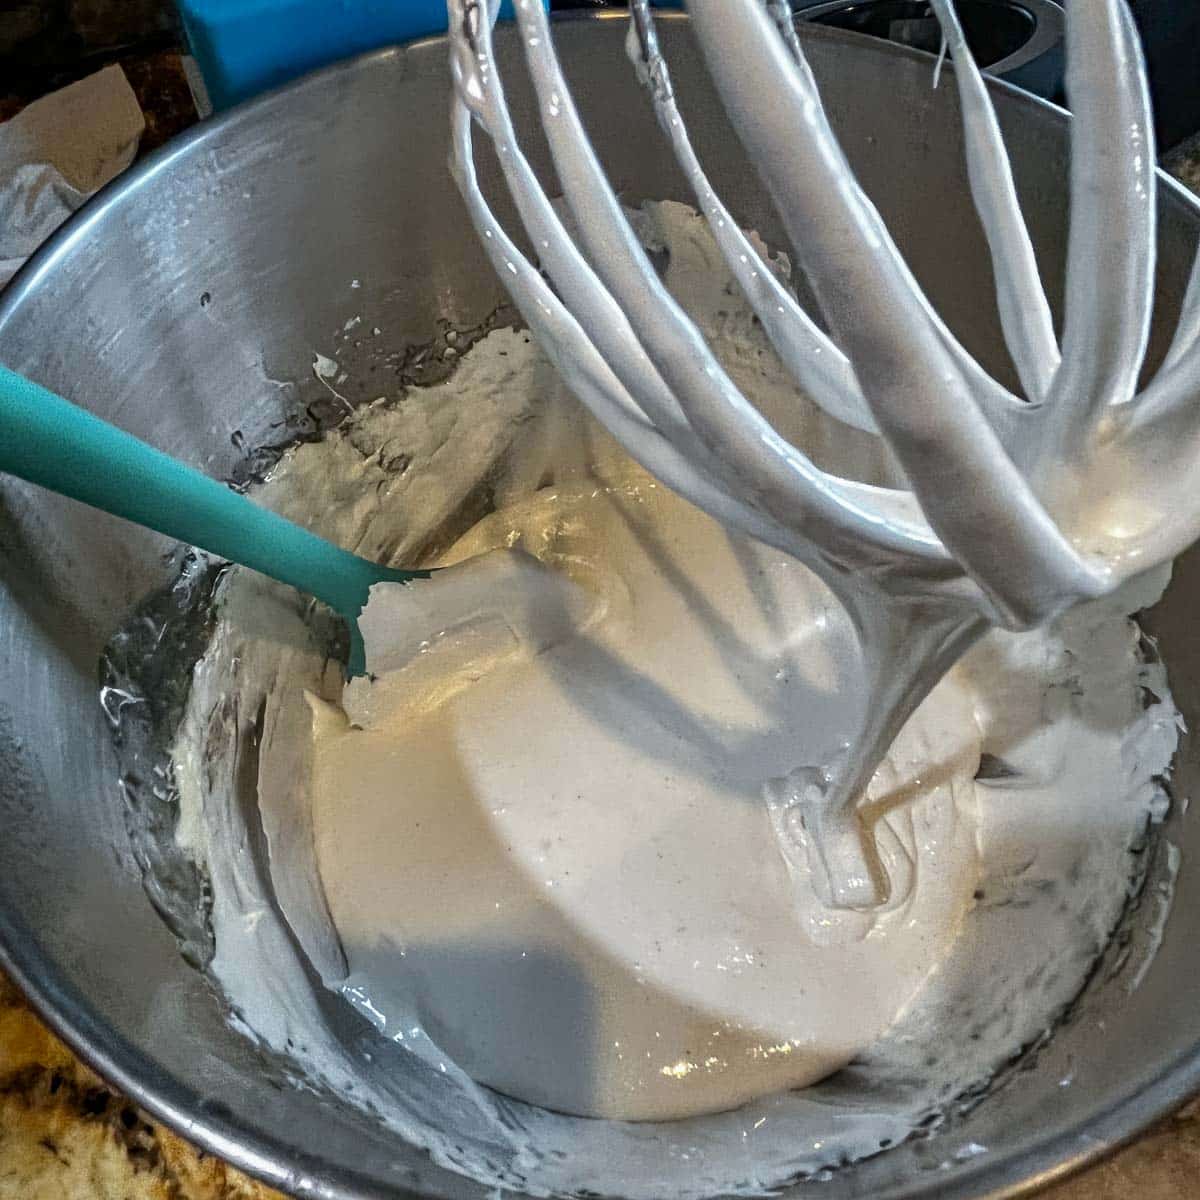 whipped egg whites in a mixer